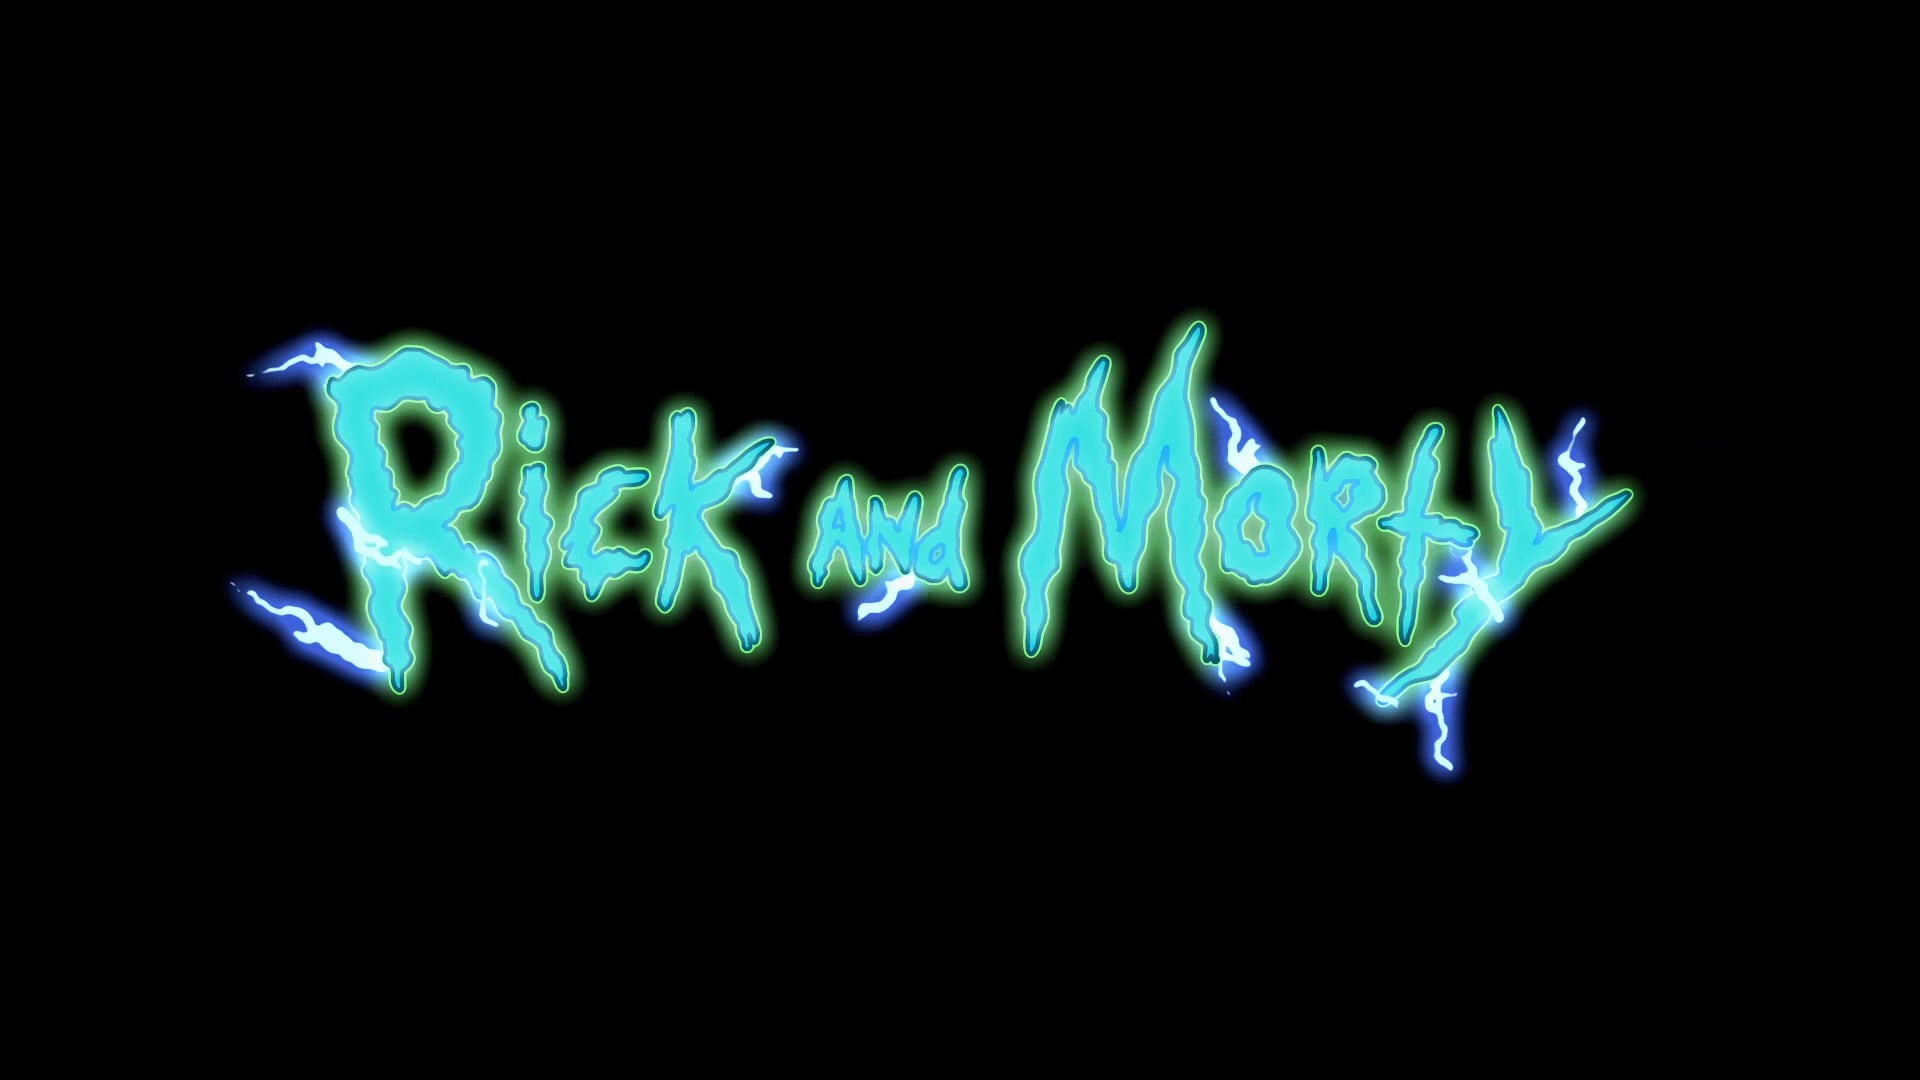 Wallpaper Rick and Morty Desktop with resolution 1920X1080 pixel. You can use this wallpaper as background for your desktop Computer Screensavers, Android or iPhone smartphones